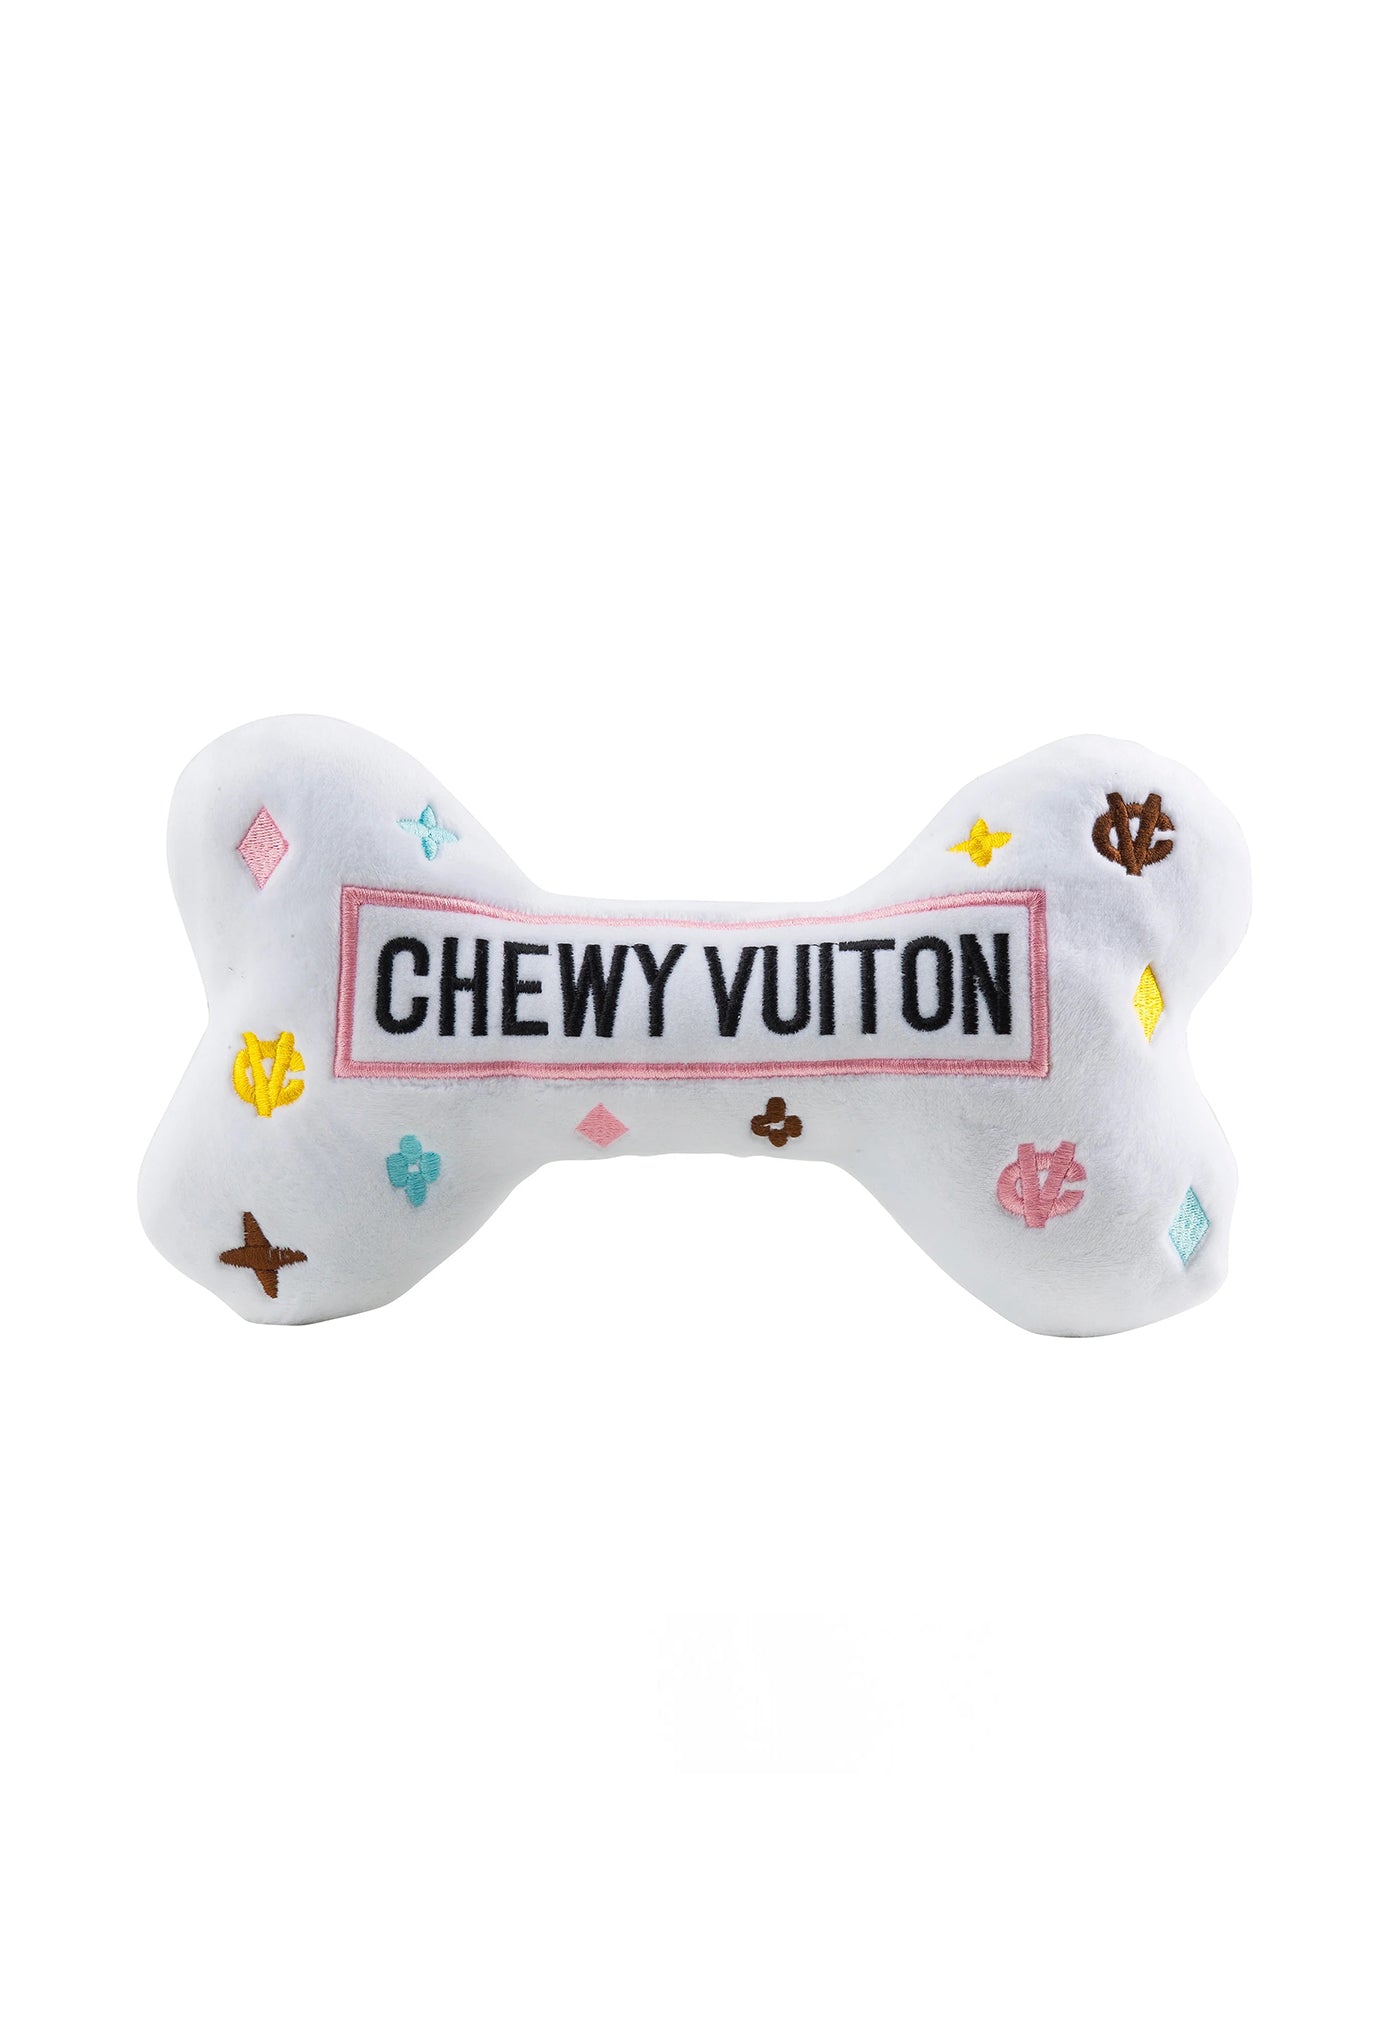 Chewy Vuiton Bone - White sold by Angel Divine